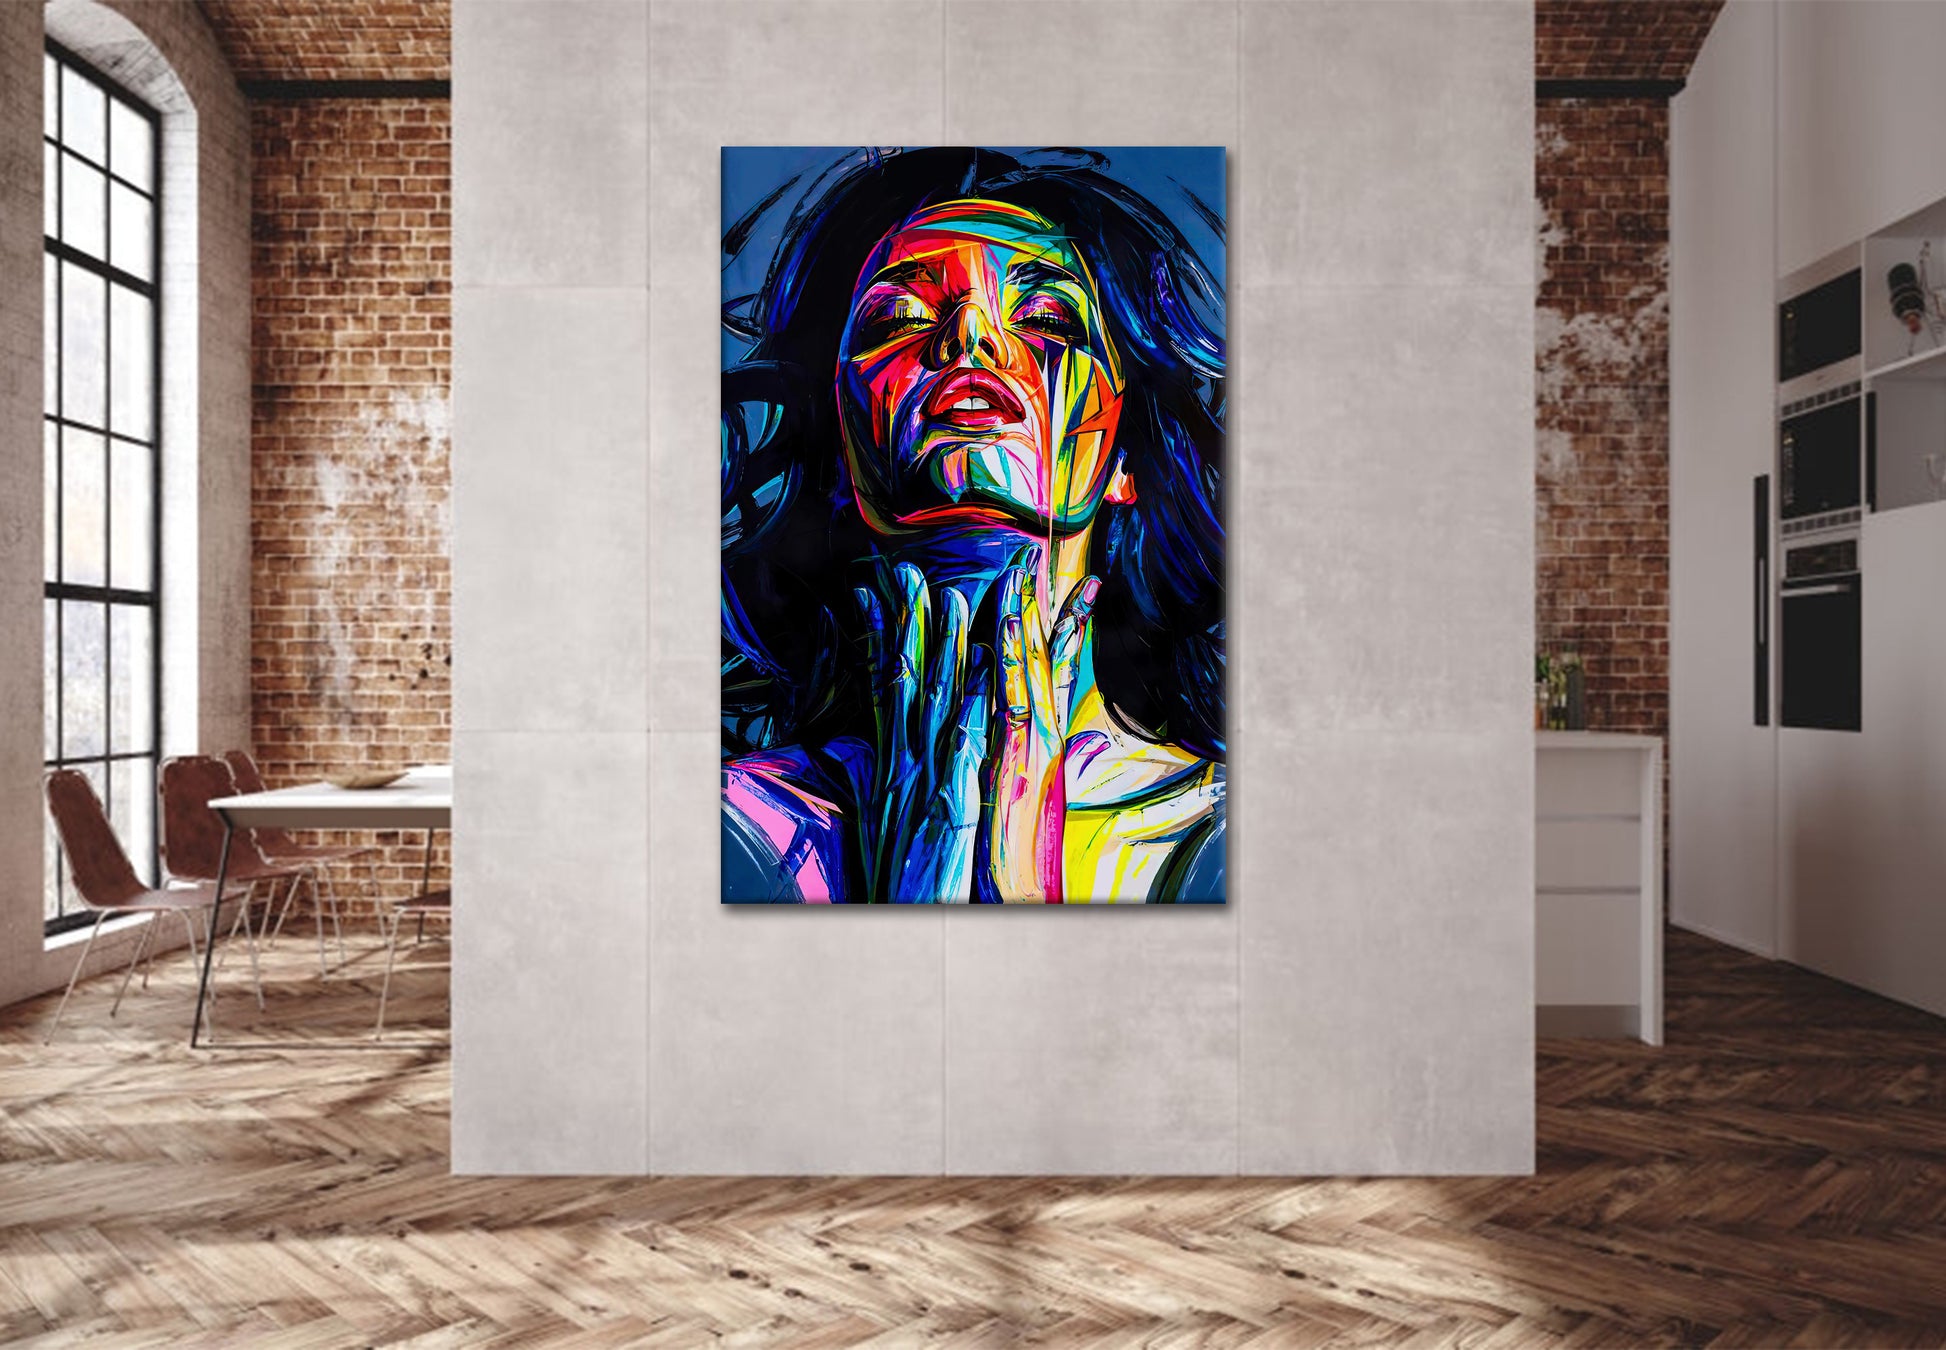 The Woman - Pop Art - Vented Canvas